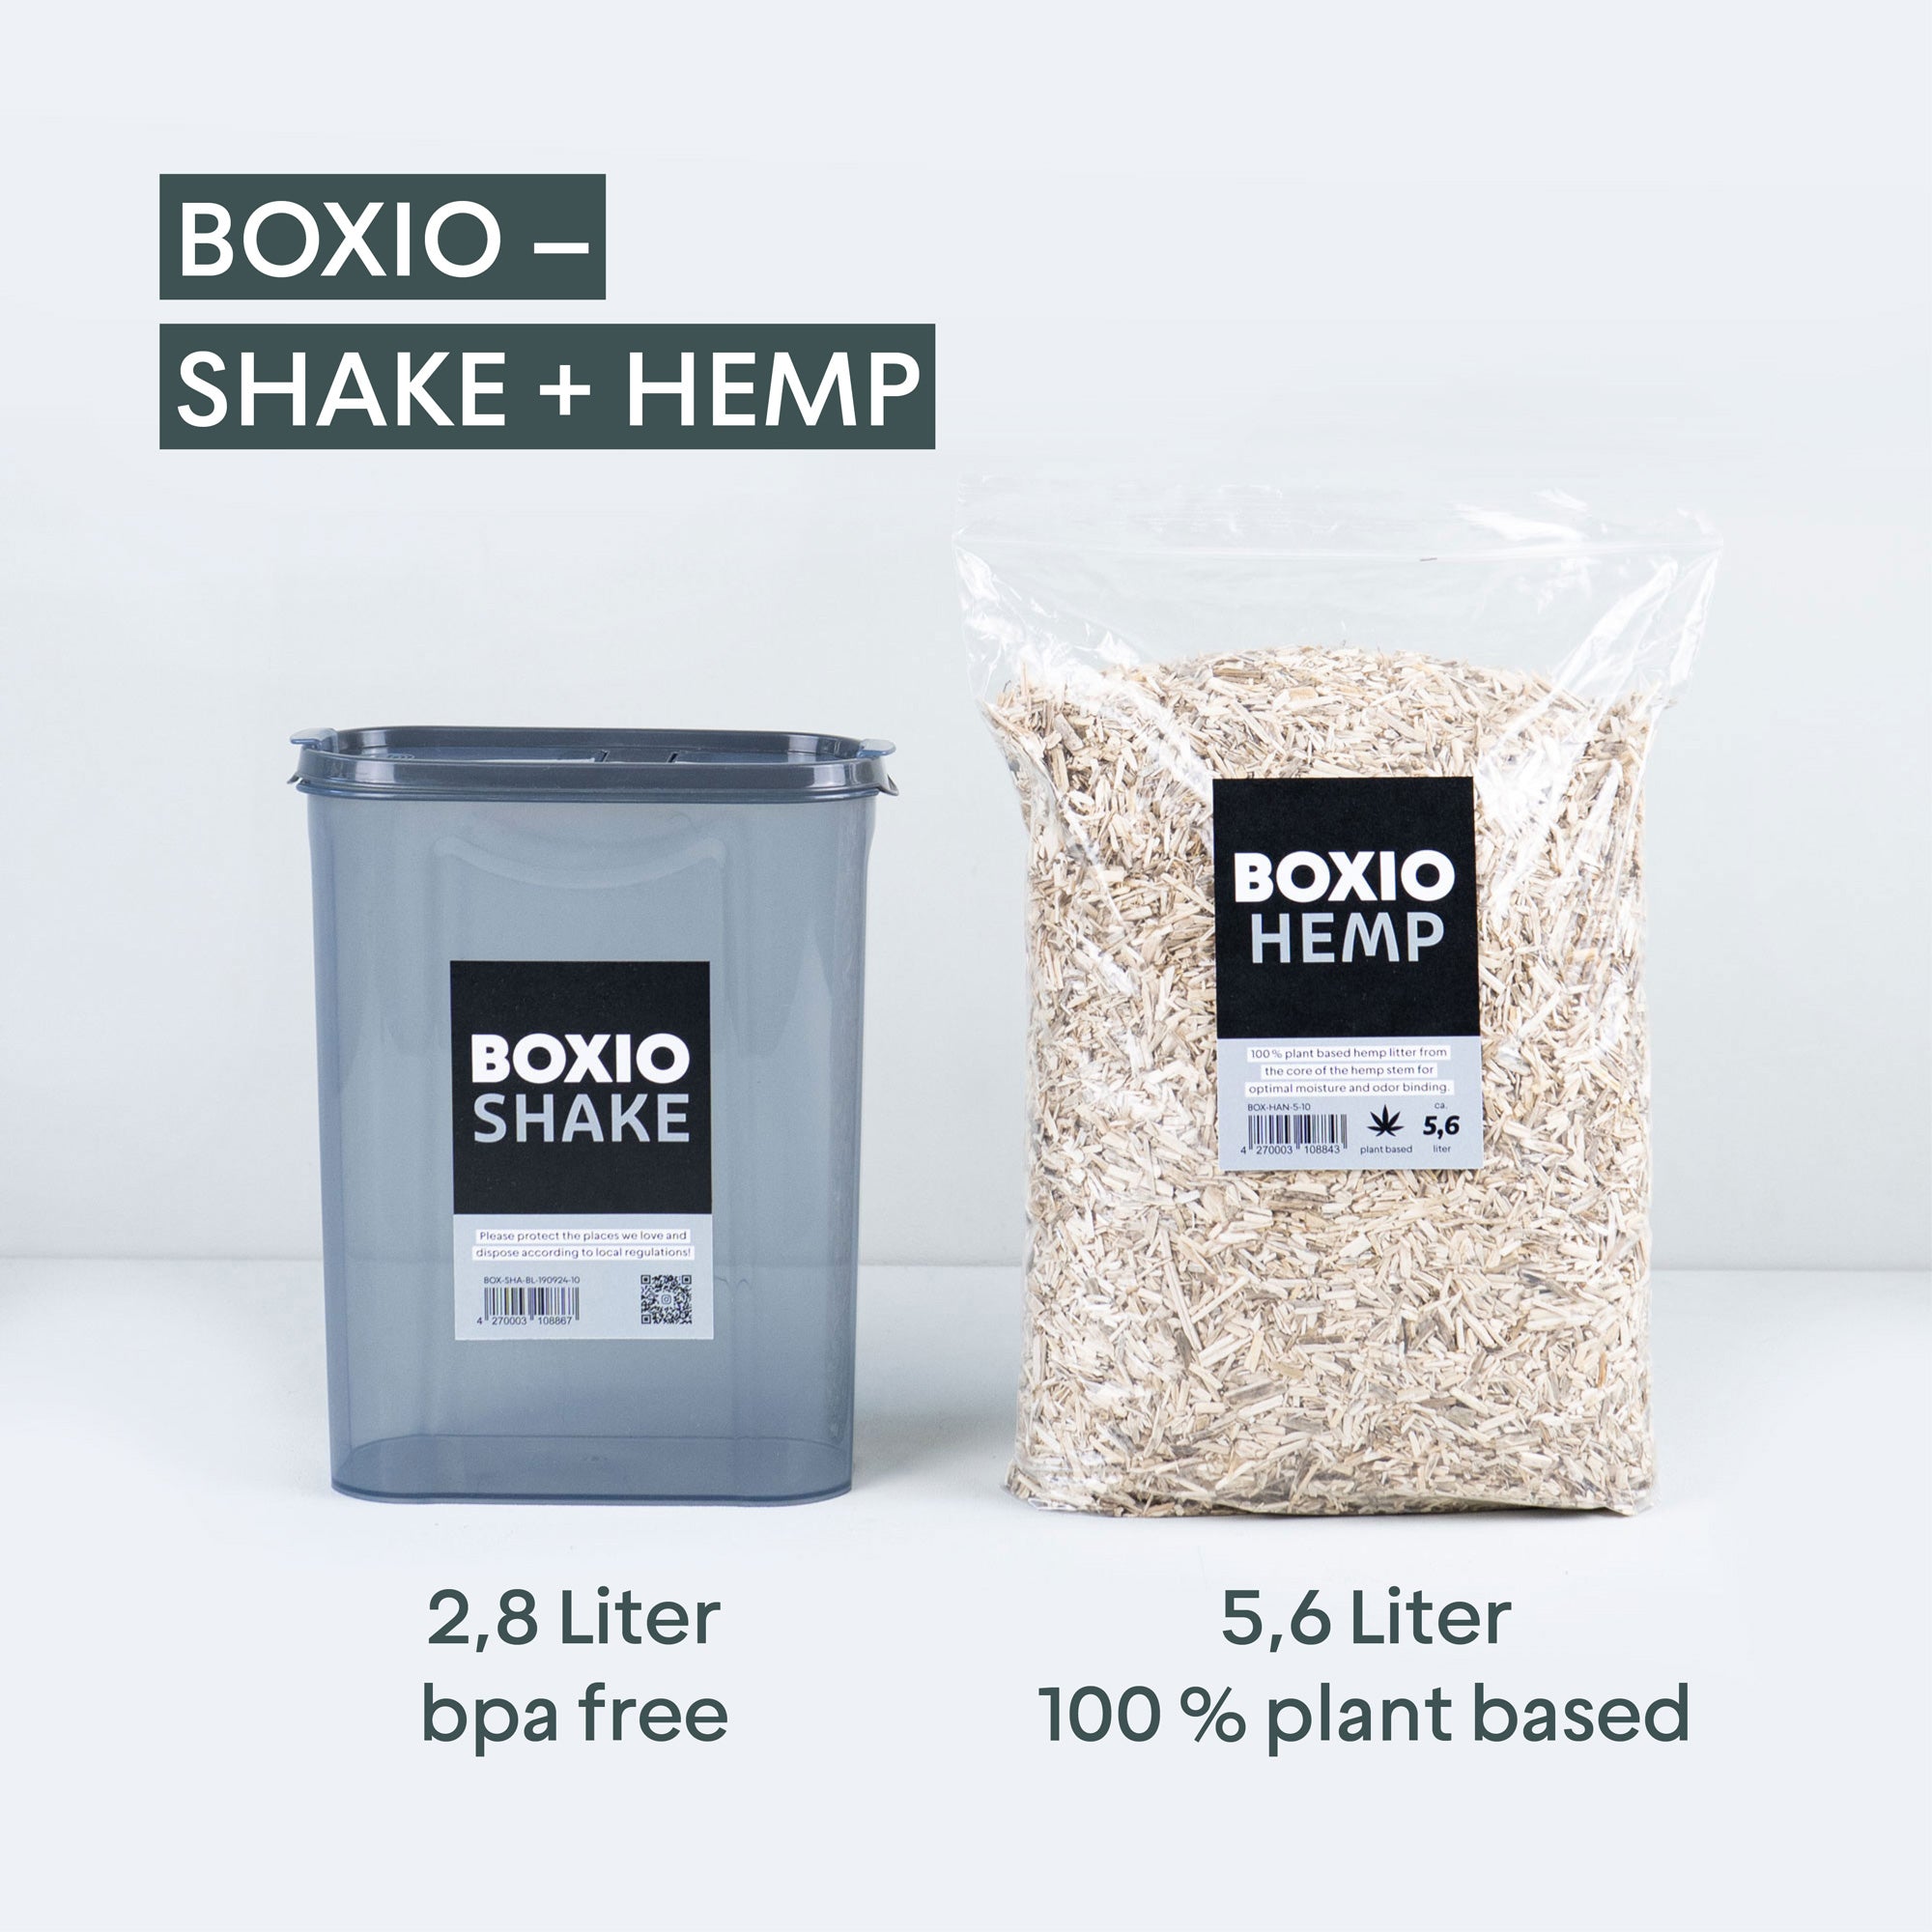 BOXIO - Toilet Up: The Booster Seat for Your Separation Toilet